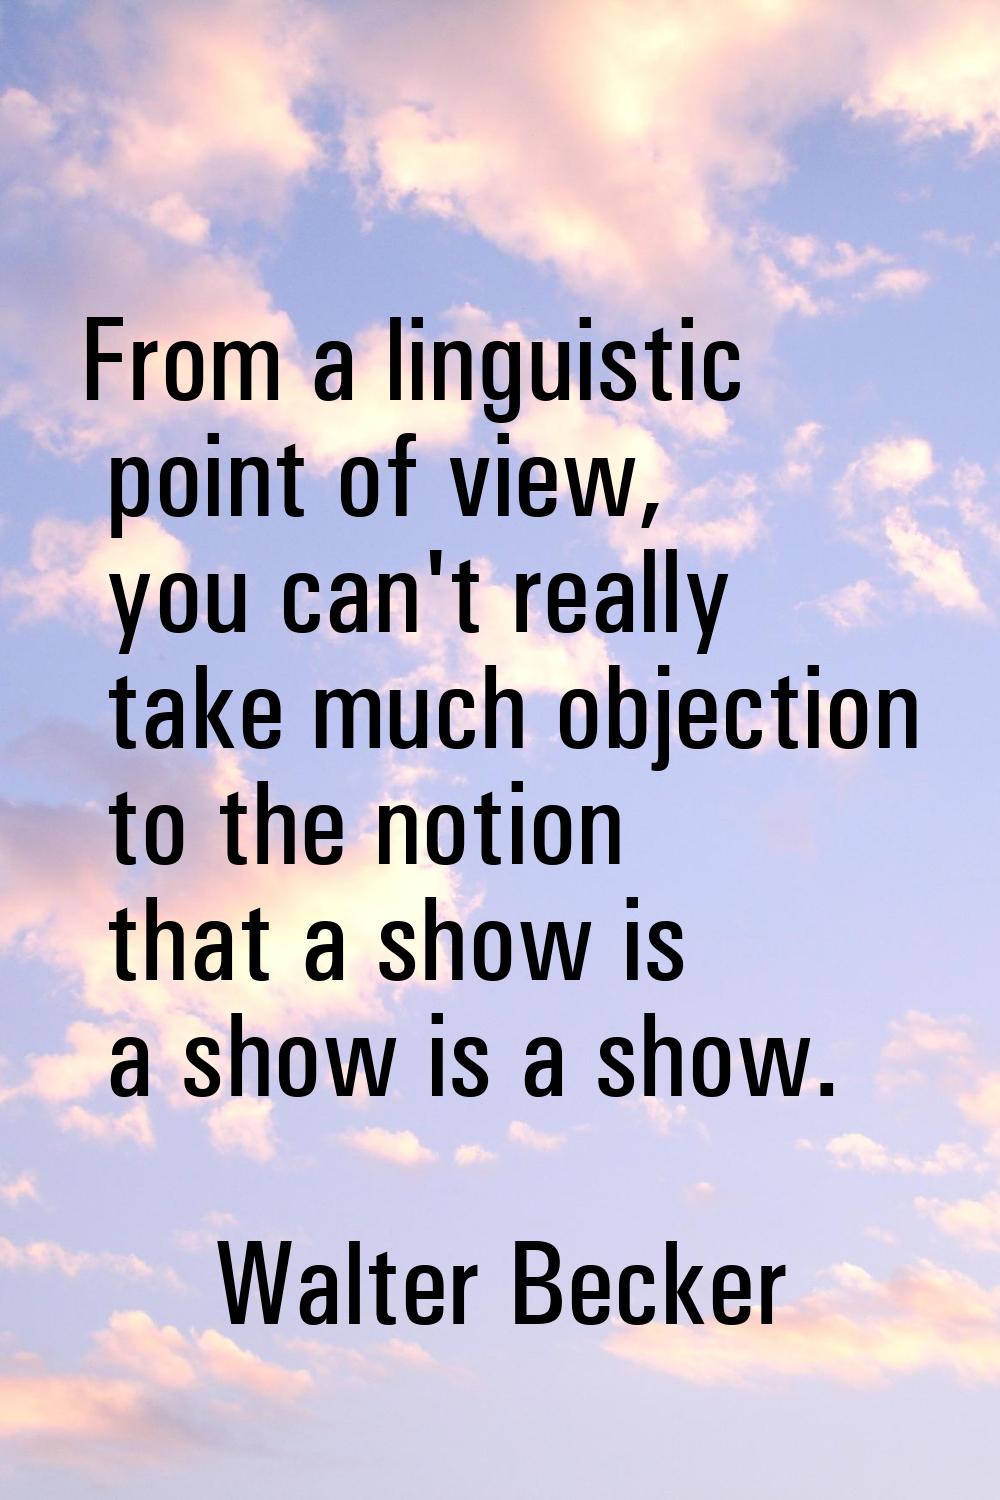 From a linguistic point of view, you can't really take much objection to the notion that a show is 